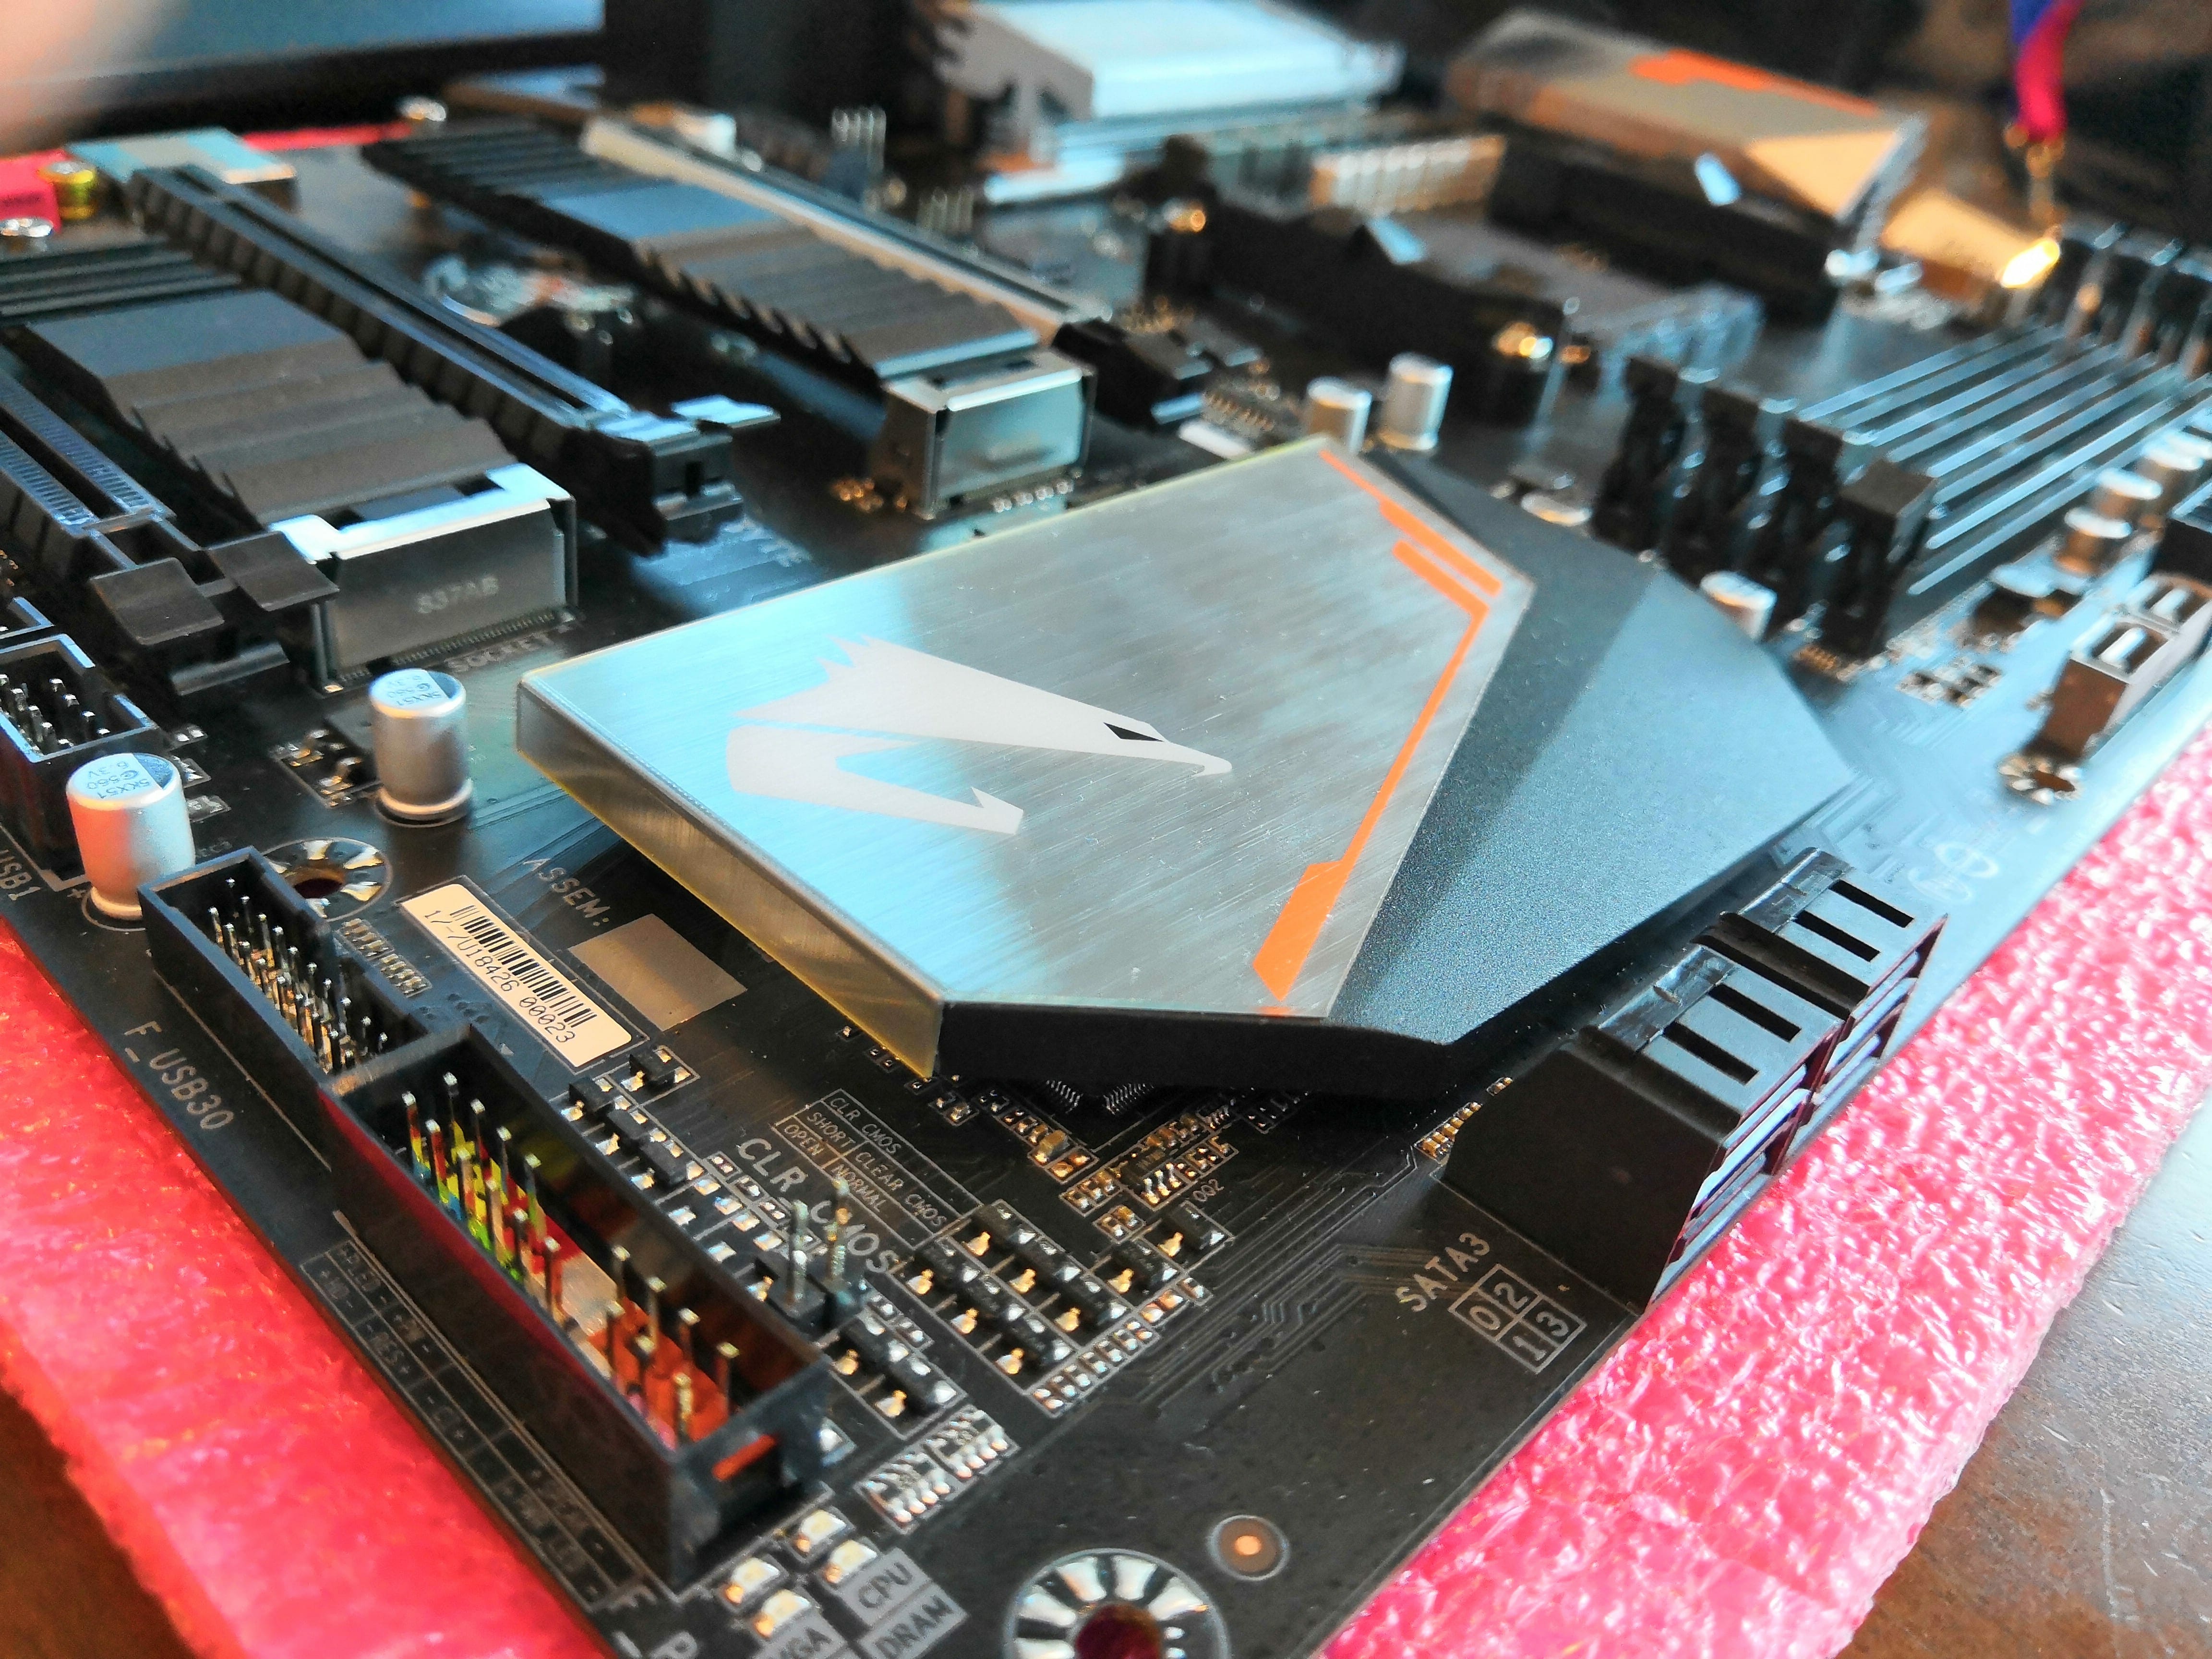 Gigabyte B450 Aorus Motherboard Announced: Specs and Prices